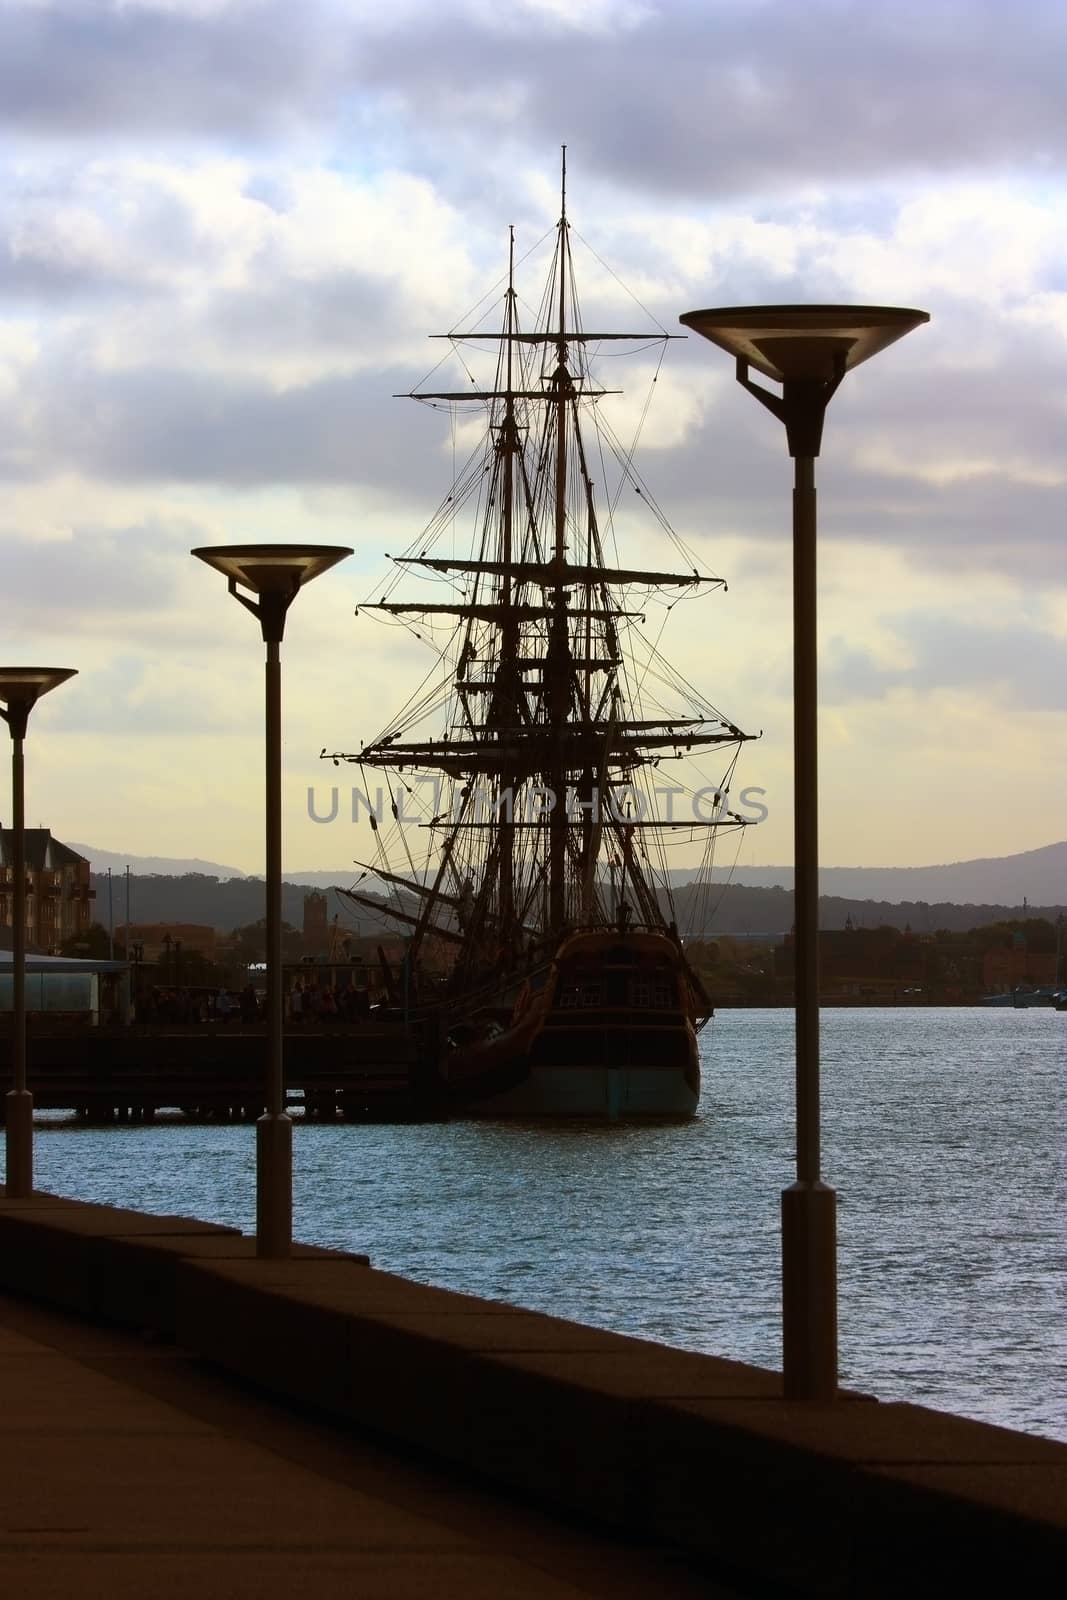 An old sailing ship moored at a pier by definitearts